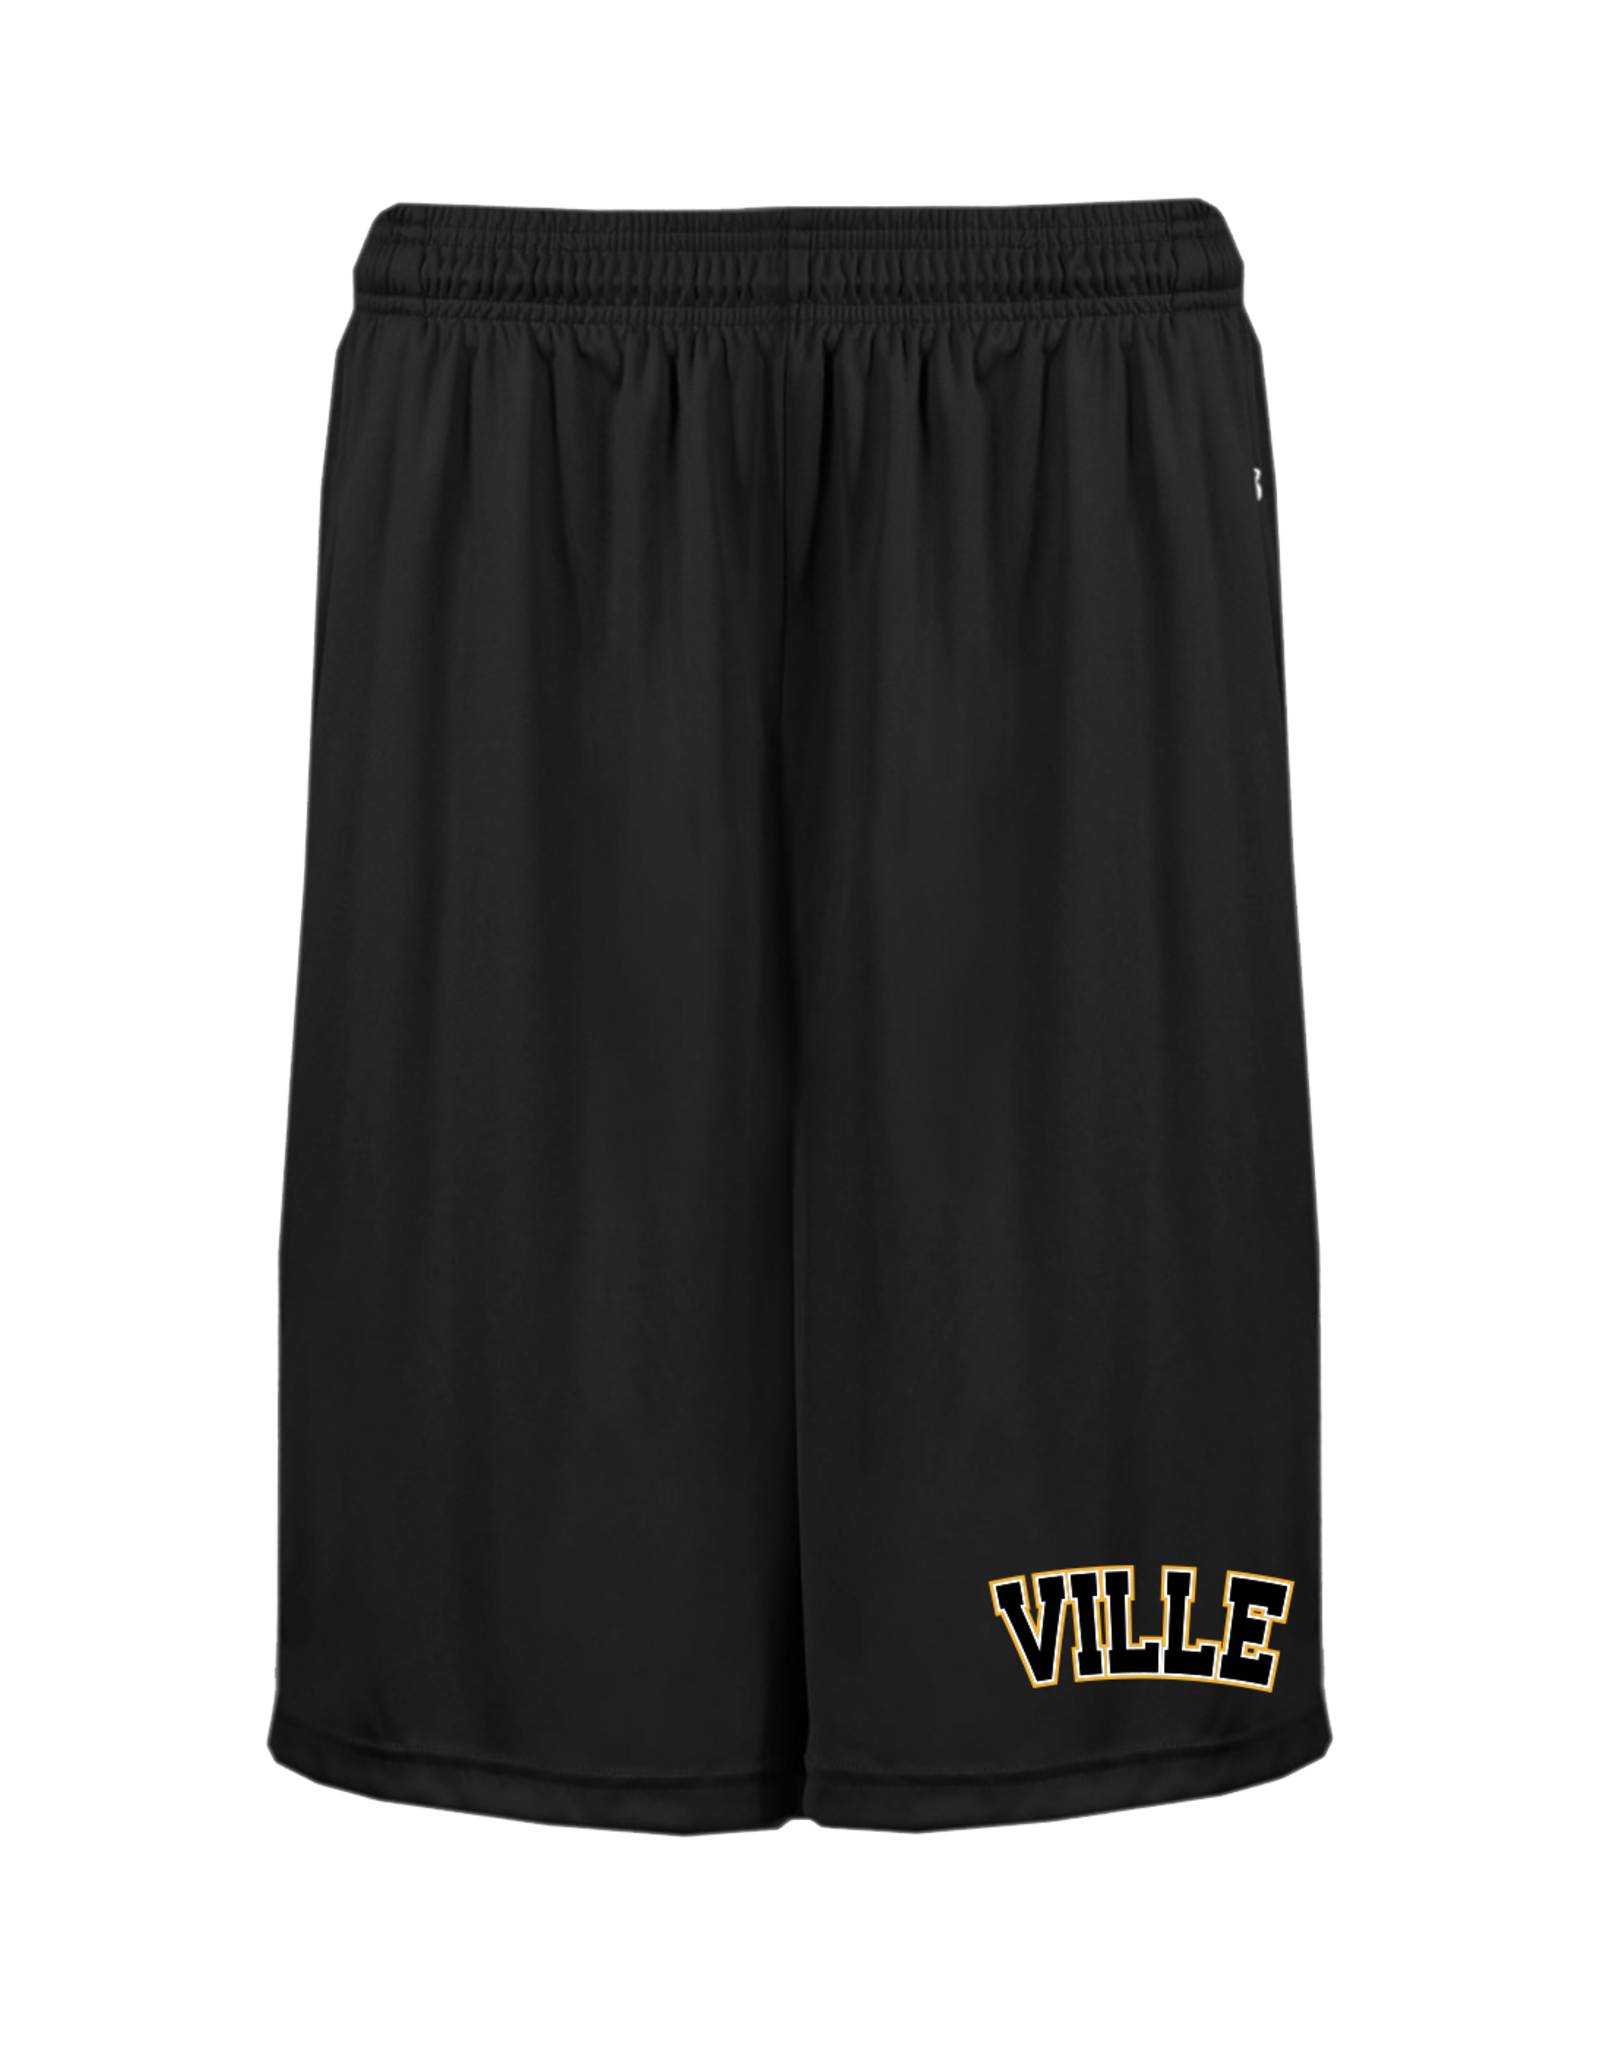 B-Core Shorts with Pockets